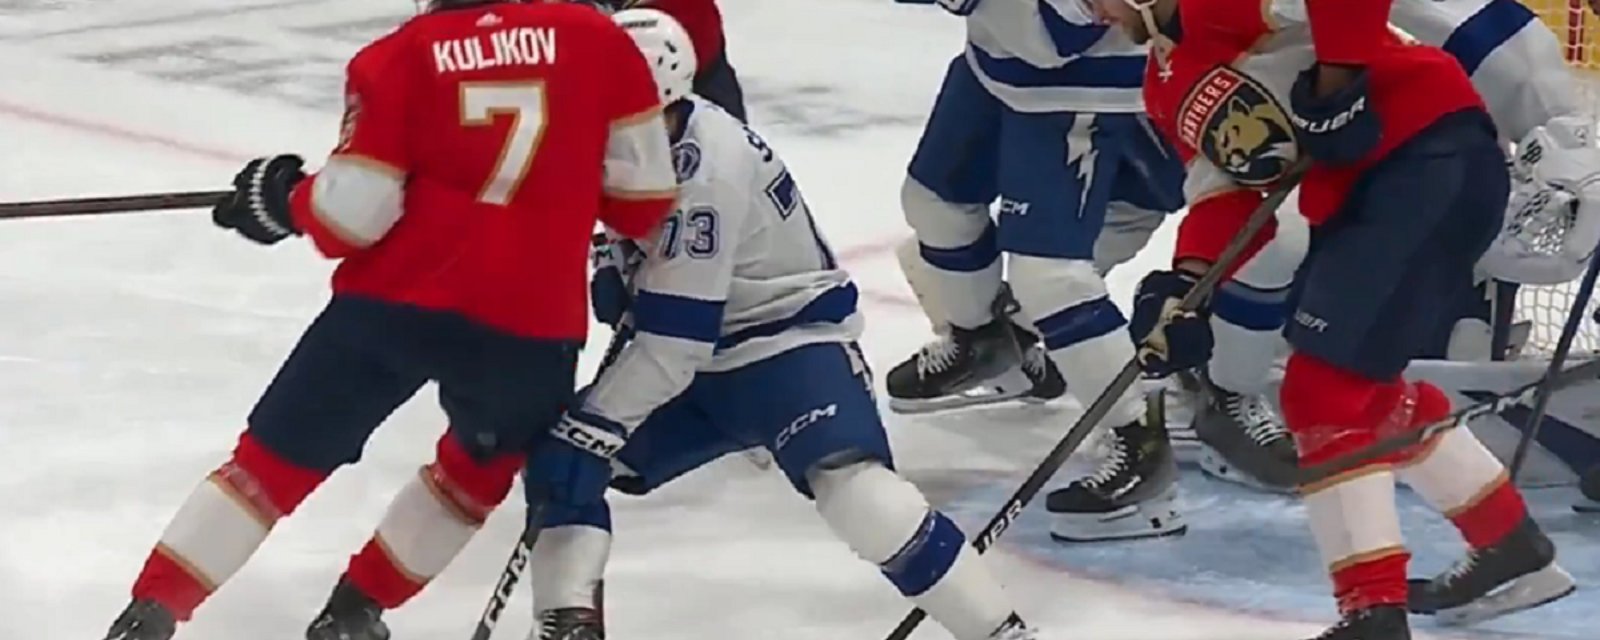 Dmitry Kulikov facing suspension for hit on Conor Sheary.